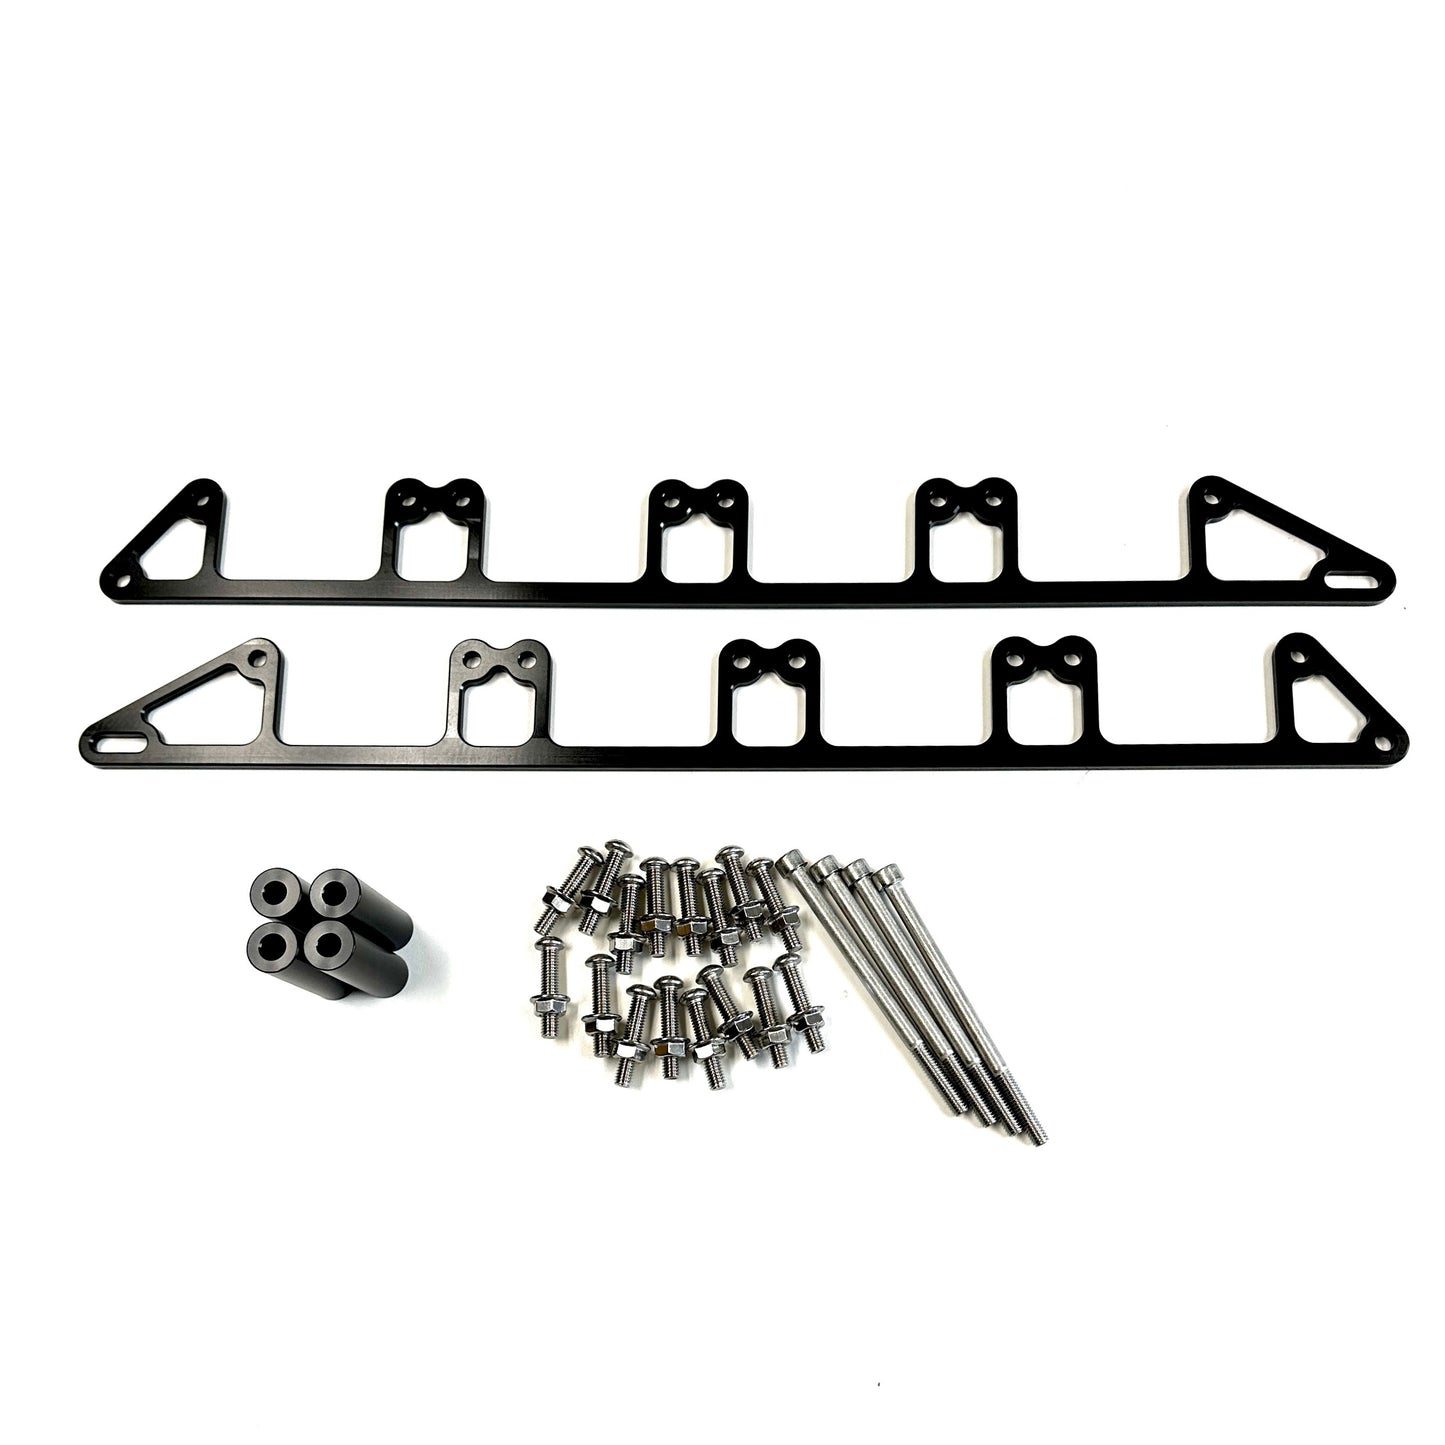 2018-20 Coyote Smart Coil Mounting Kit